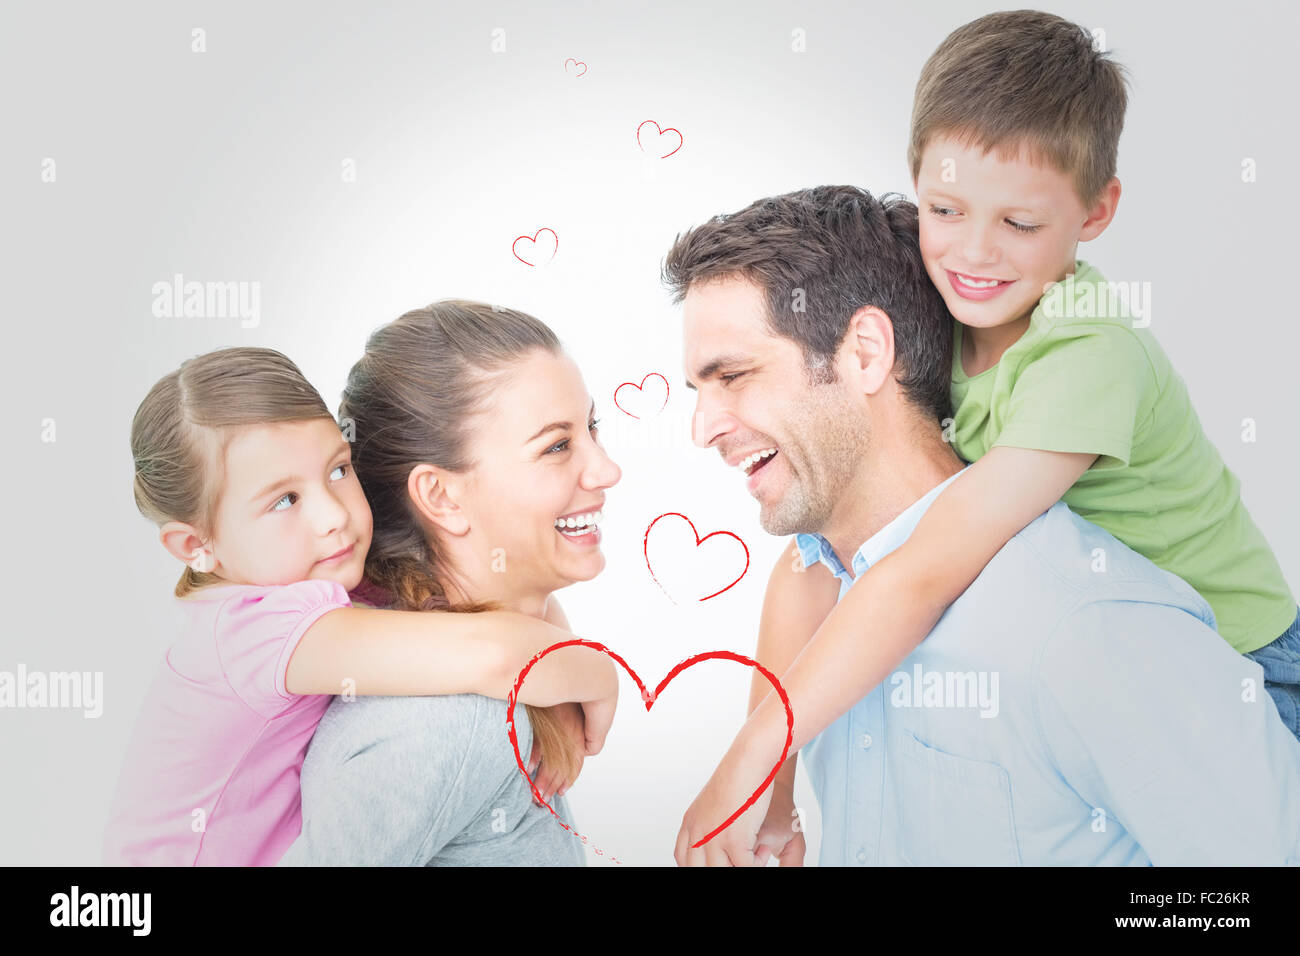 Composite image of cheerful young family posing Stock Photo